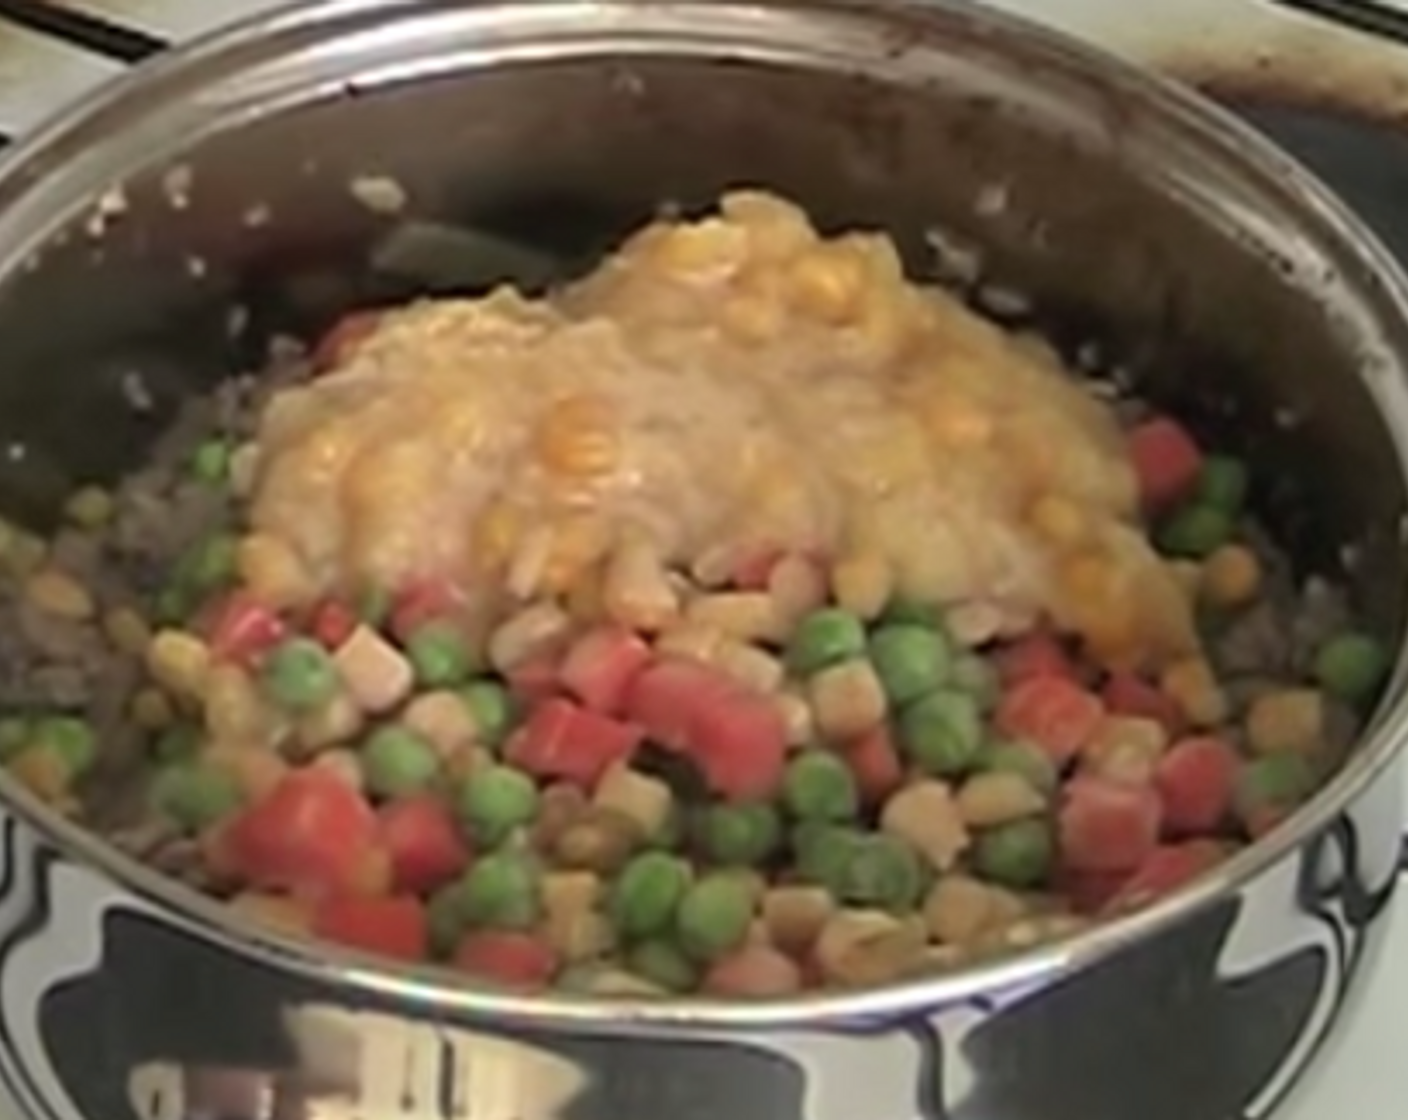 step 3 Add Frozen Mixed Vegetables (1 1/2 cups), Evaporated Milk (1/2 cup), and Creamed Corn (1/2 cup). Stir to make it mix well over low heat for 6 minutes.